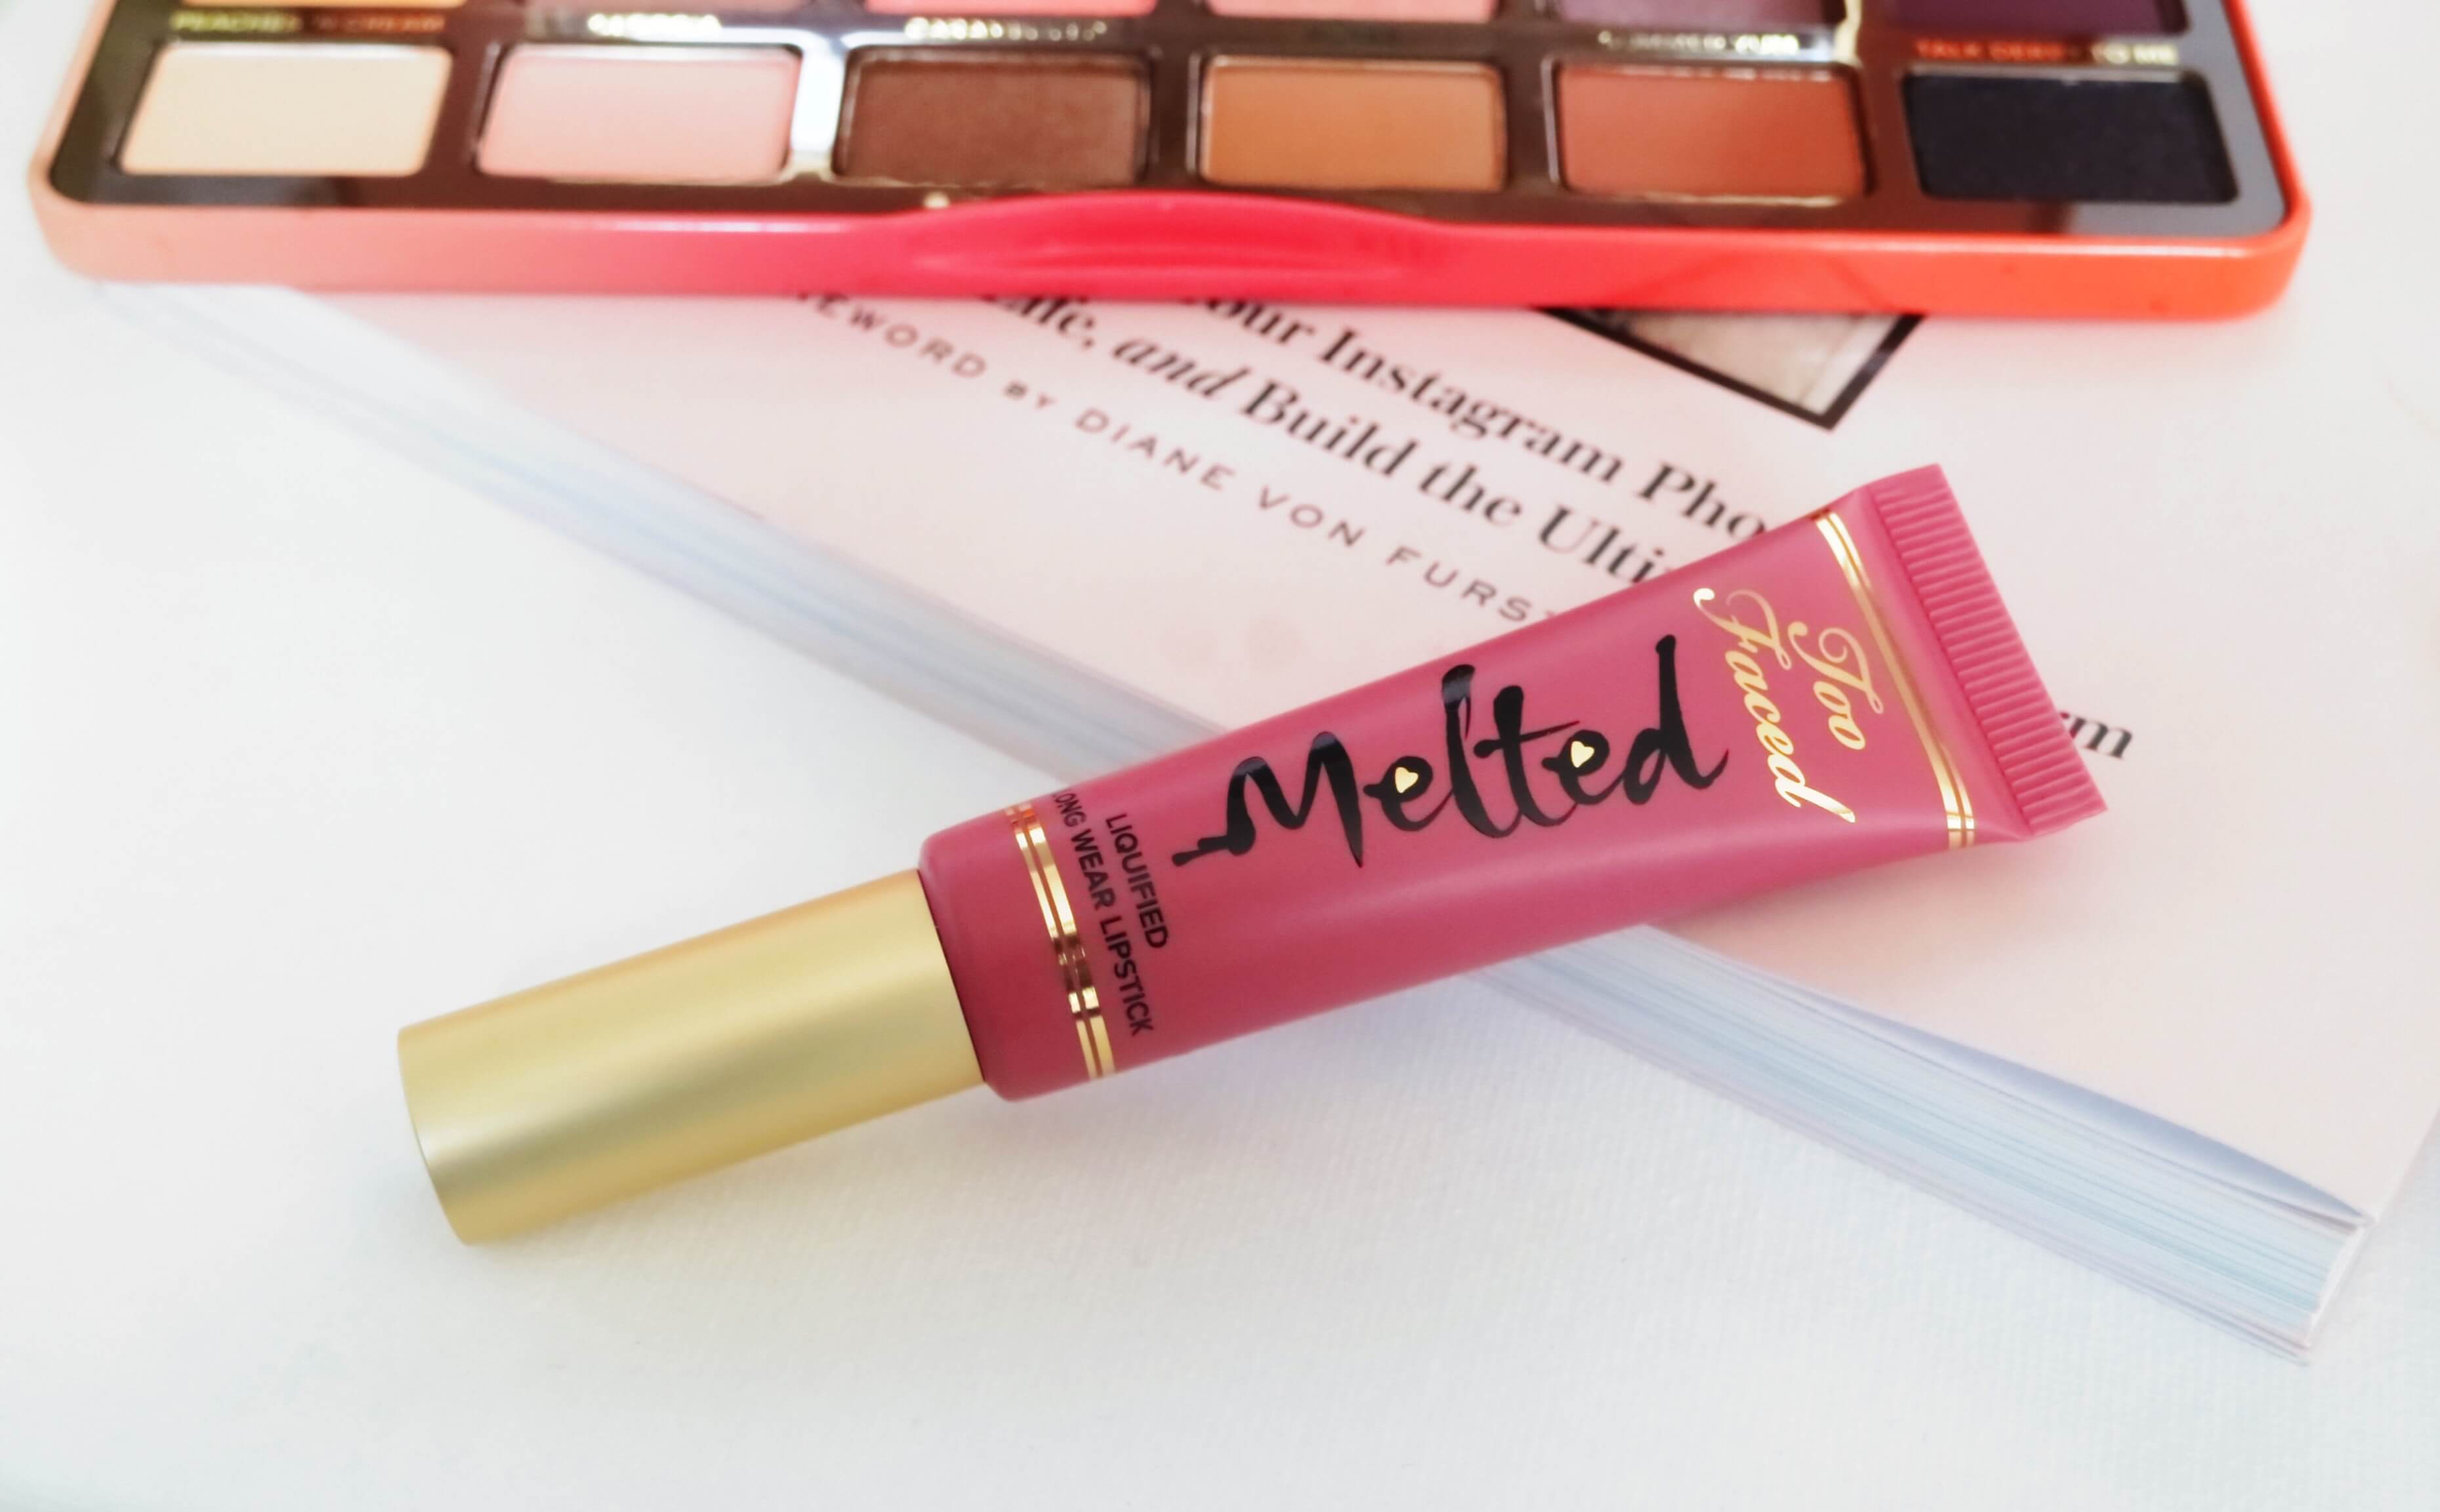 Too Faced Melted Liquefied Longwear Lipstick review